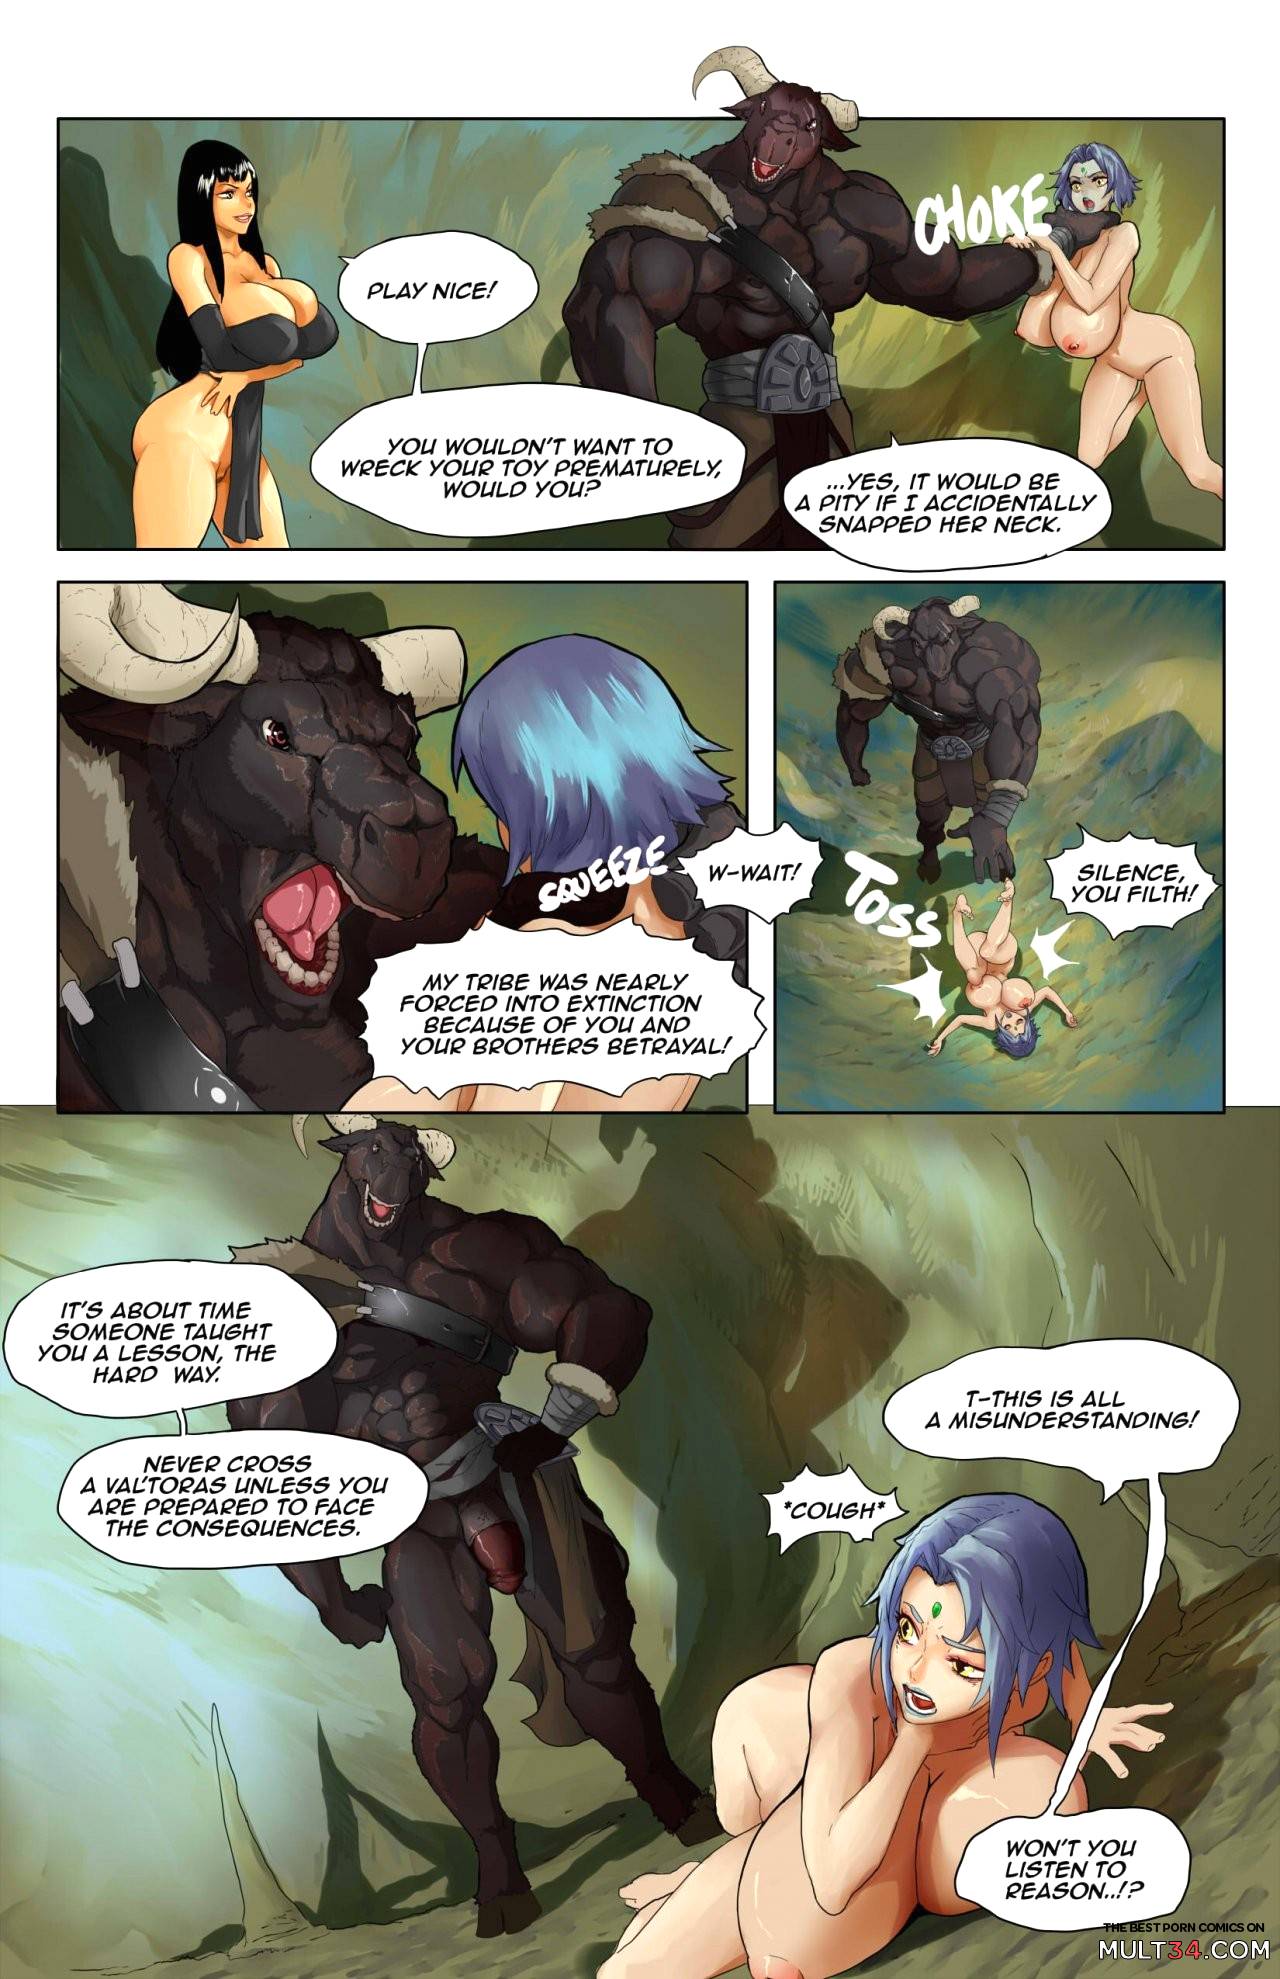 Tales of Laquadia - An Old Friend page 4